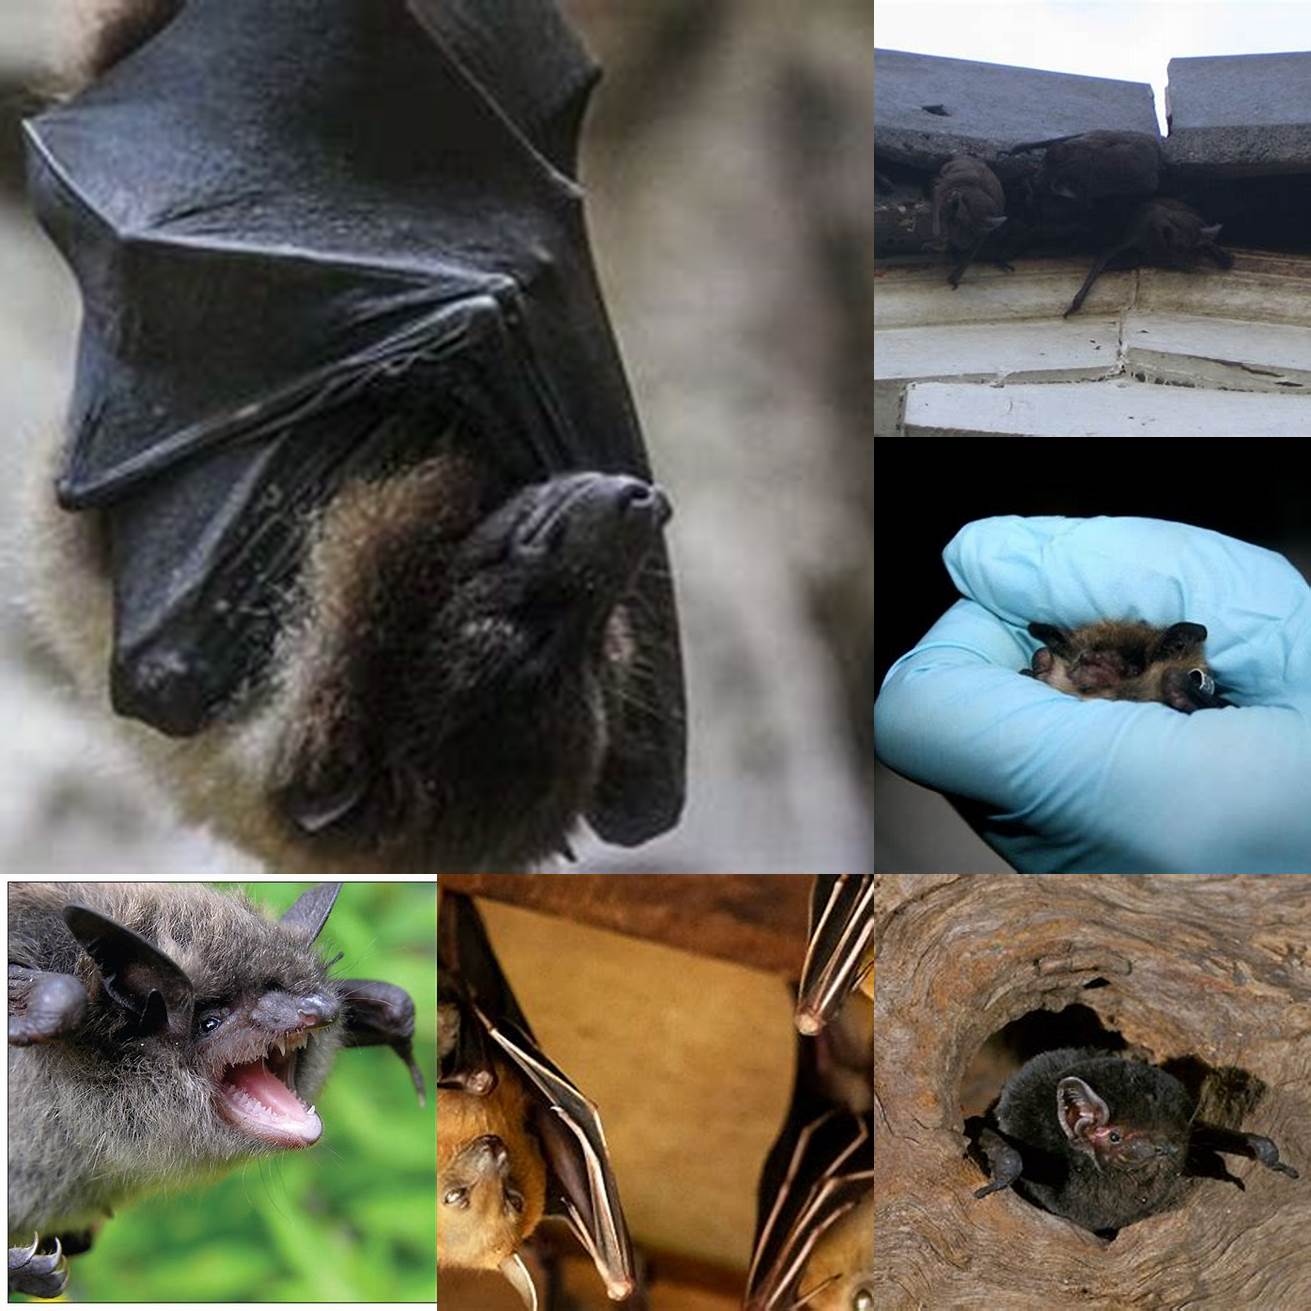 Exposure to bats or other wildlife that may enter the home